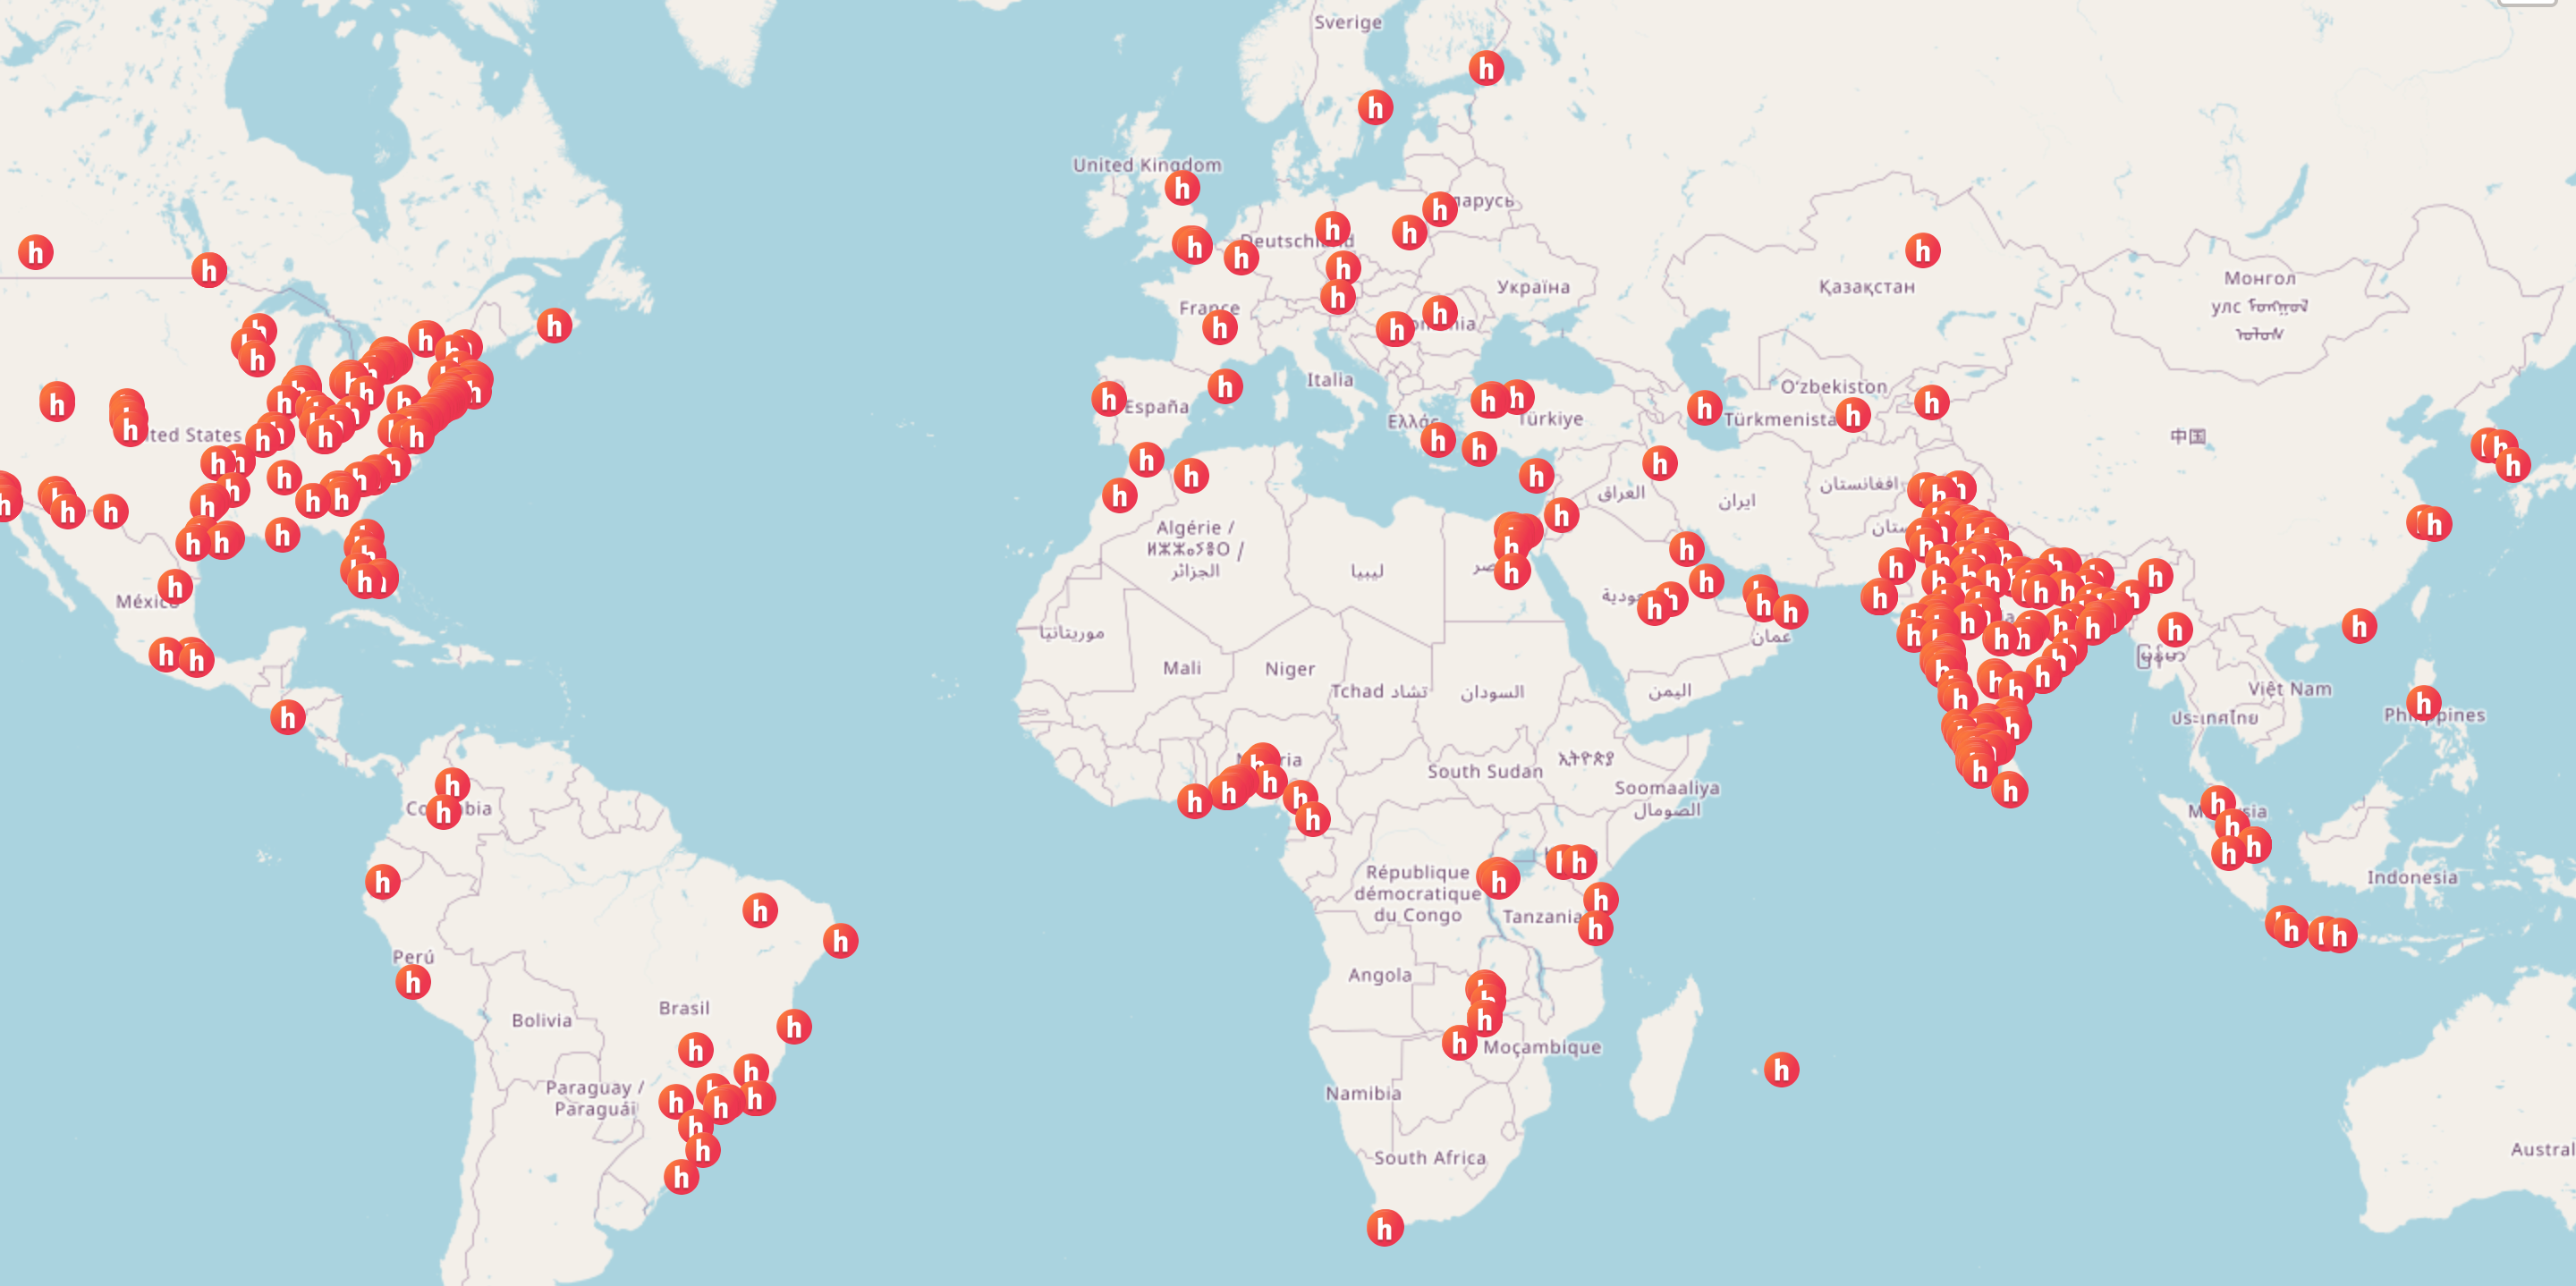 Map of Hack Clubs around the world